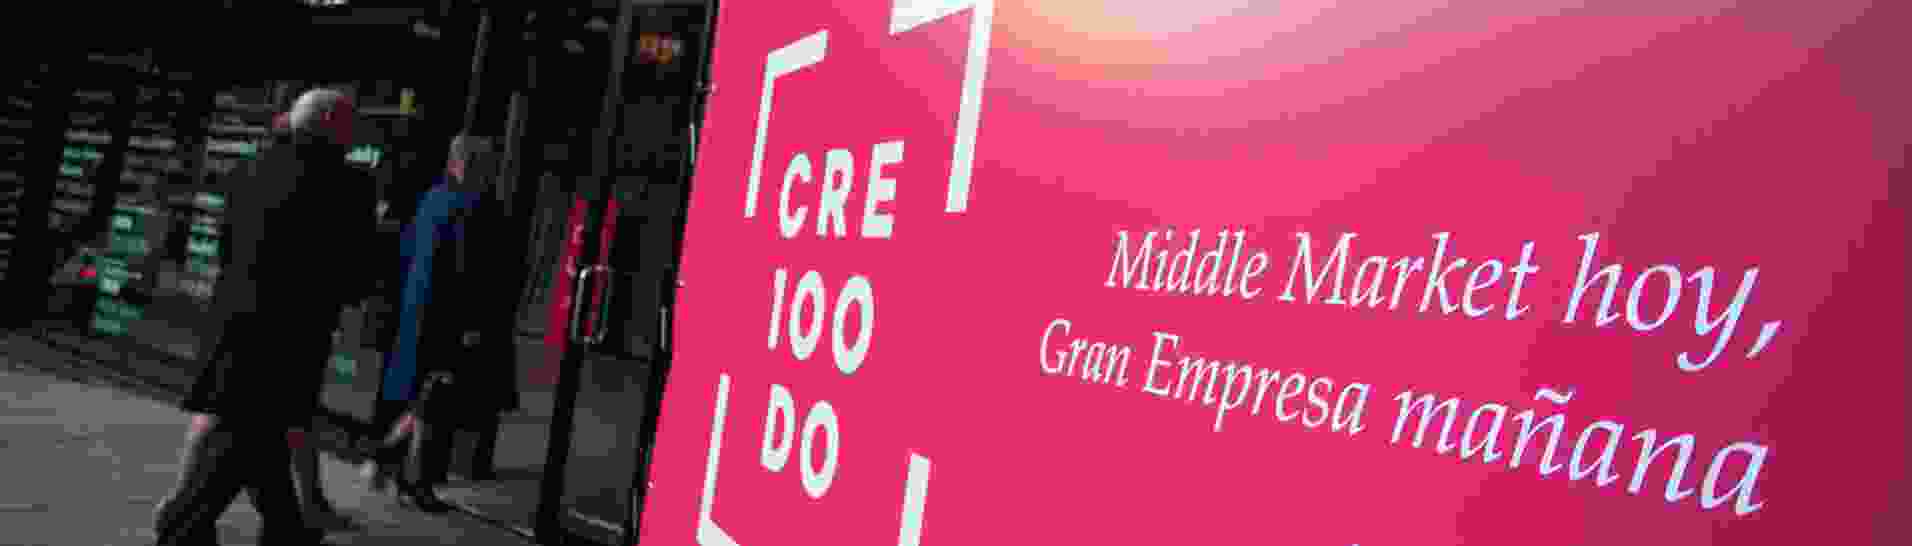 Cre100do: the national accelerator creating “The Spain Brand”